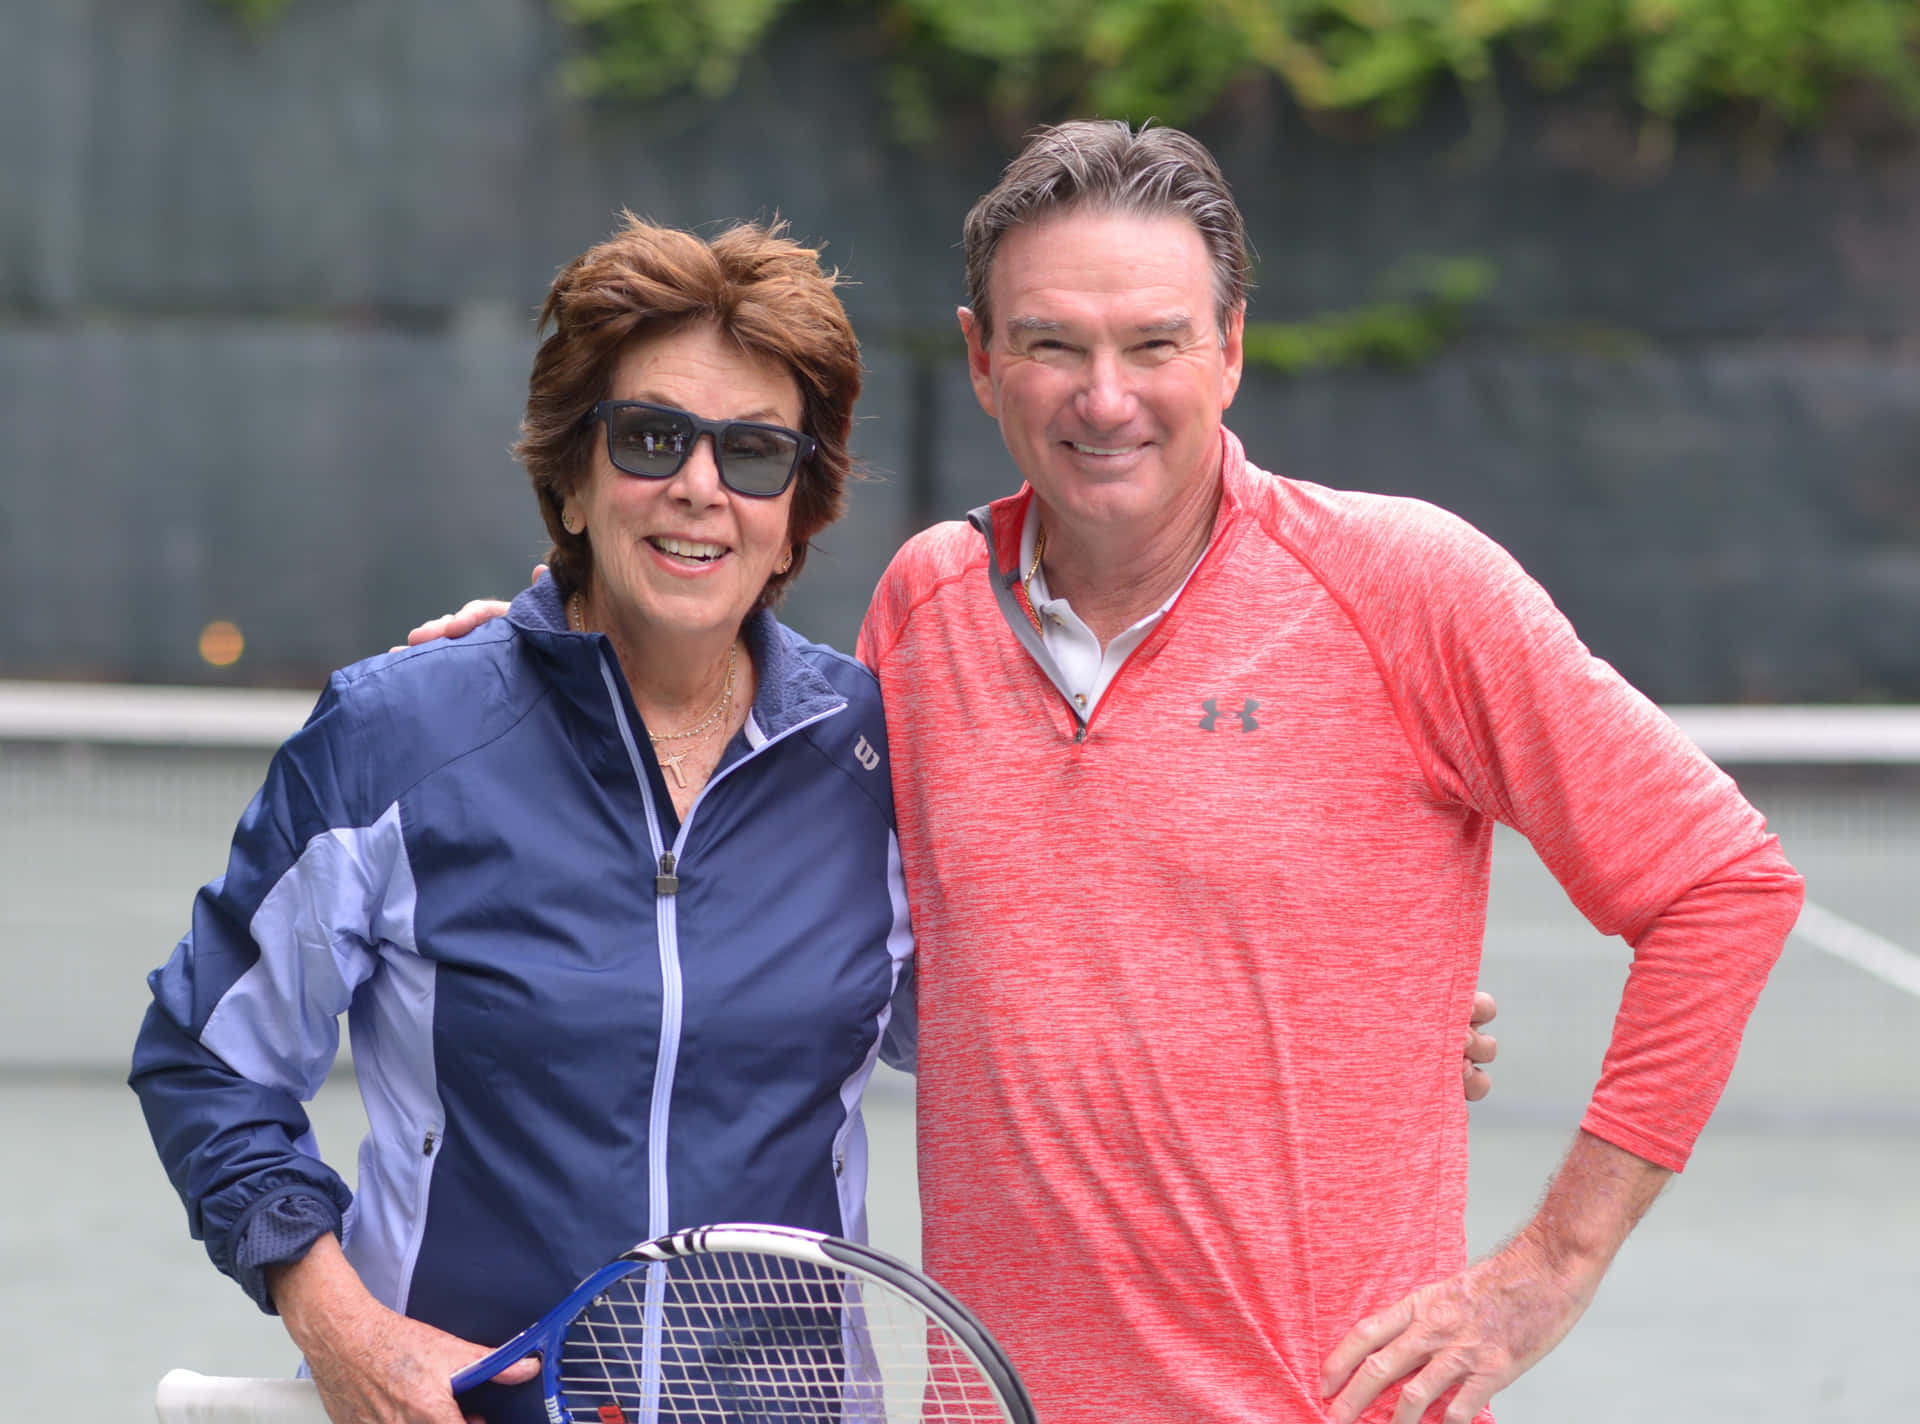 Recent Photo Of Maria Bueno With Acquaintance Wallpaper